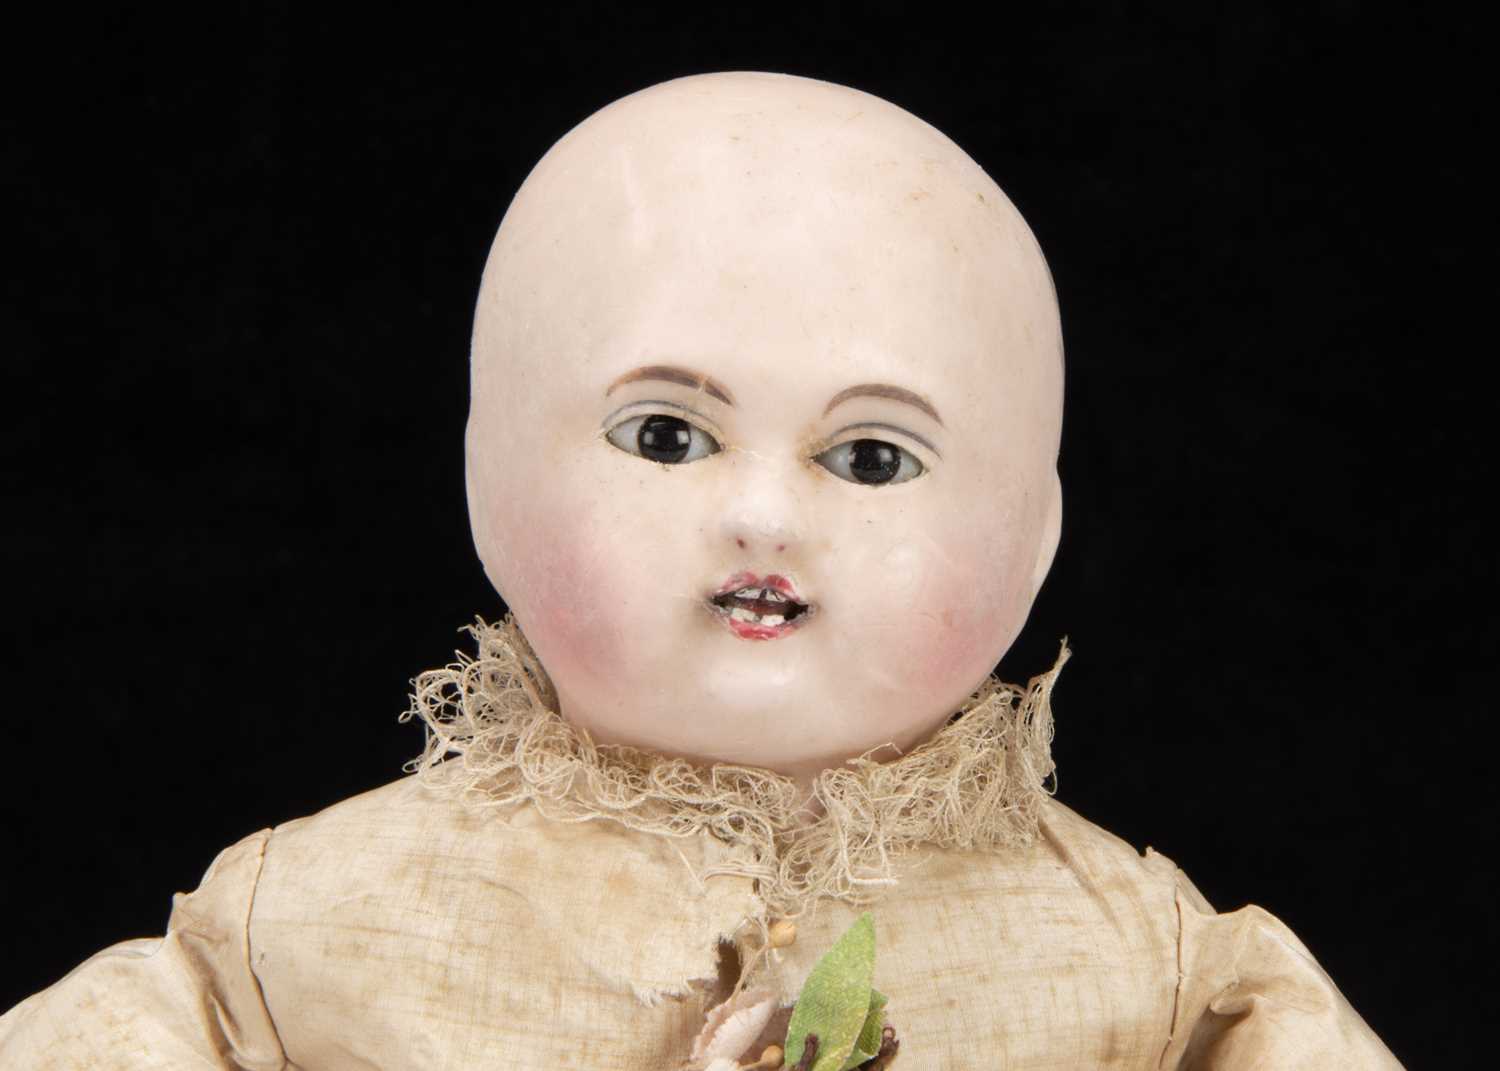 A rare mid 19th century wax over papier-mâché Taufling baby, - Image 2 of 2